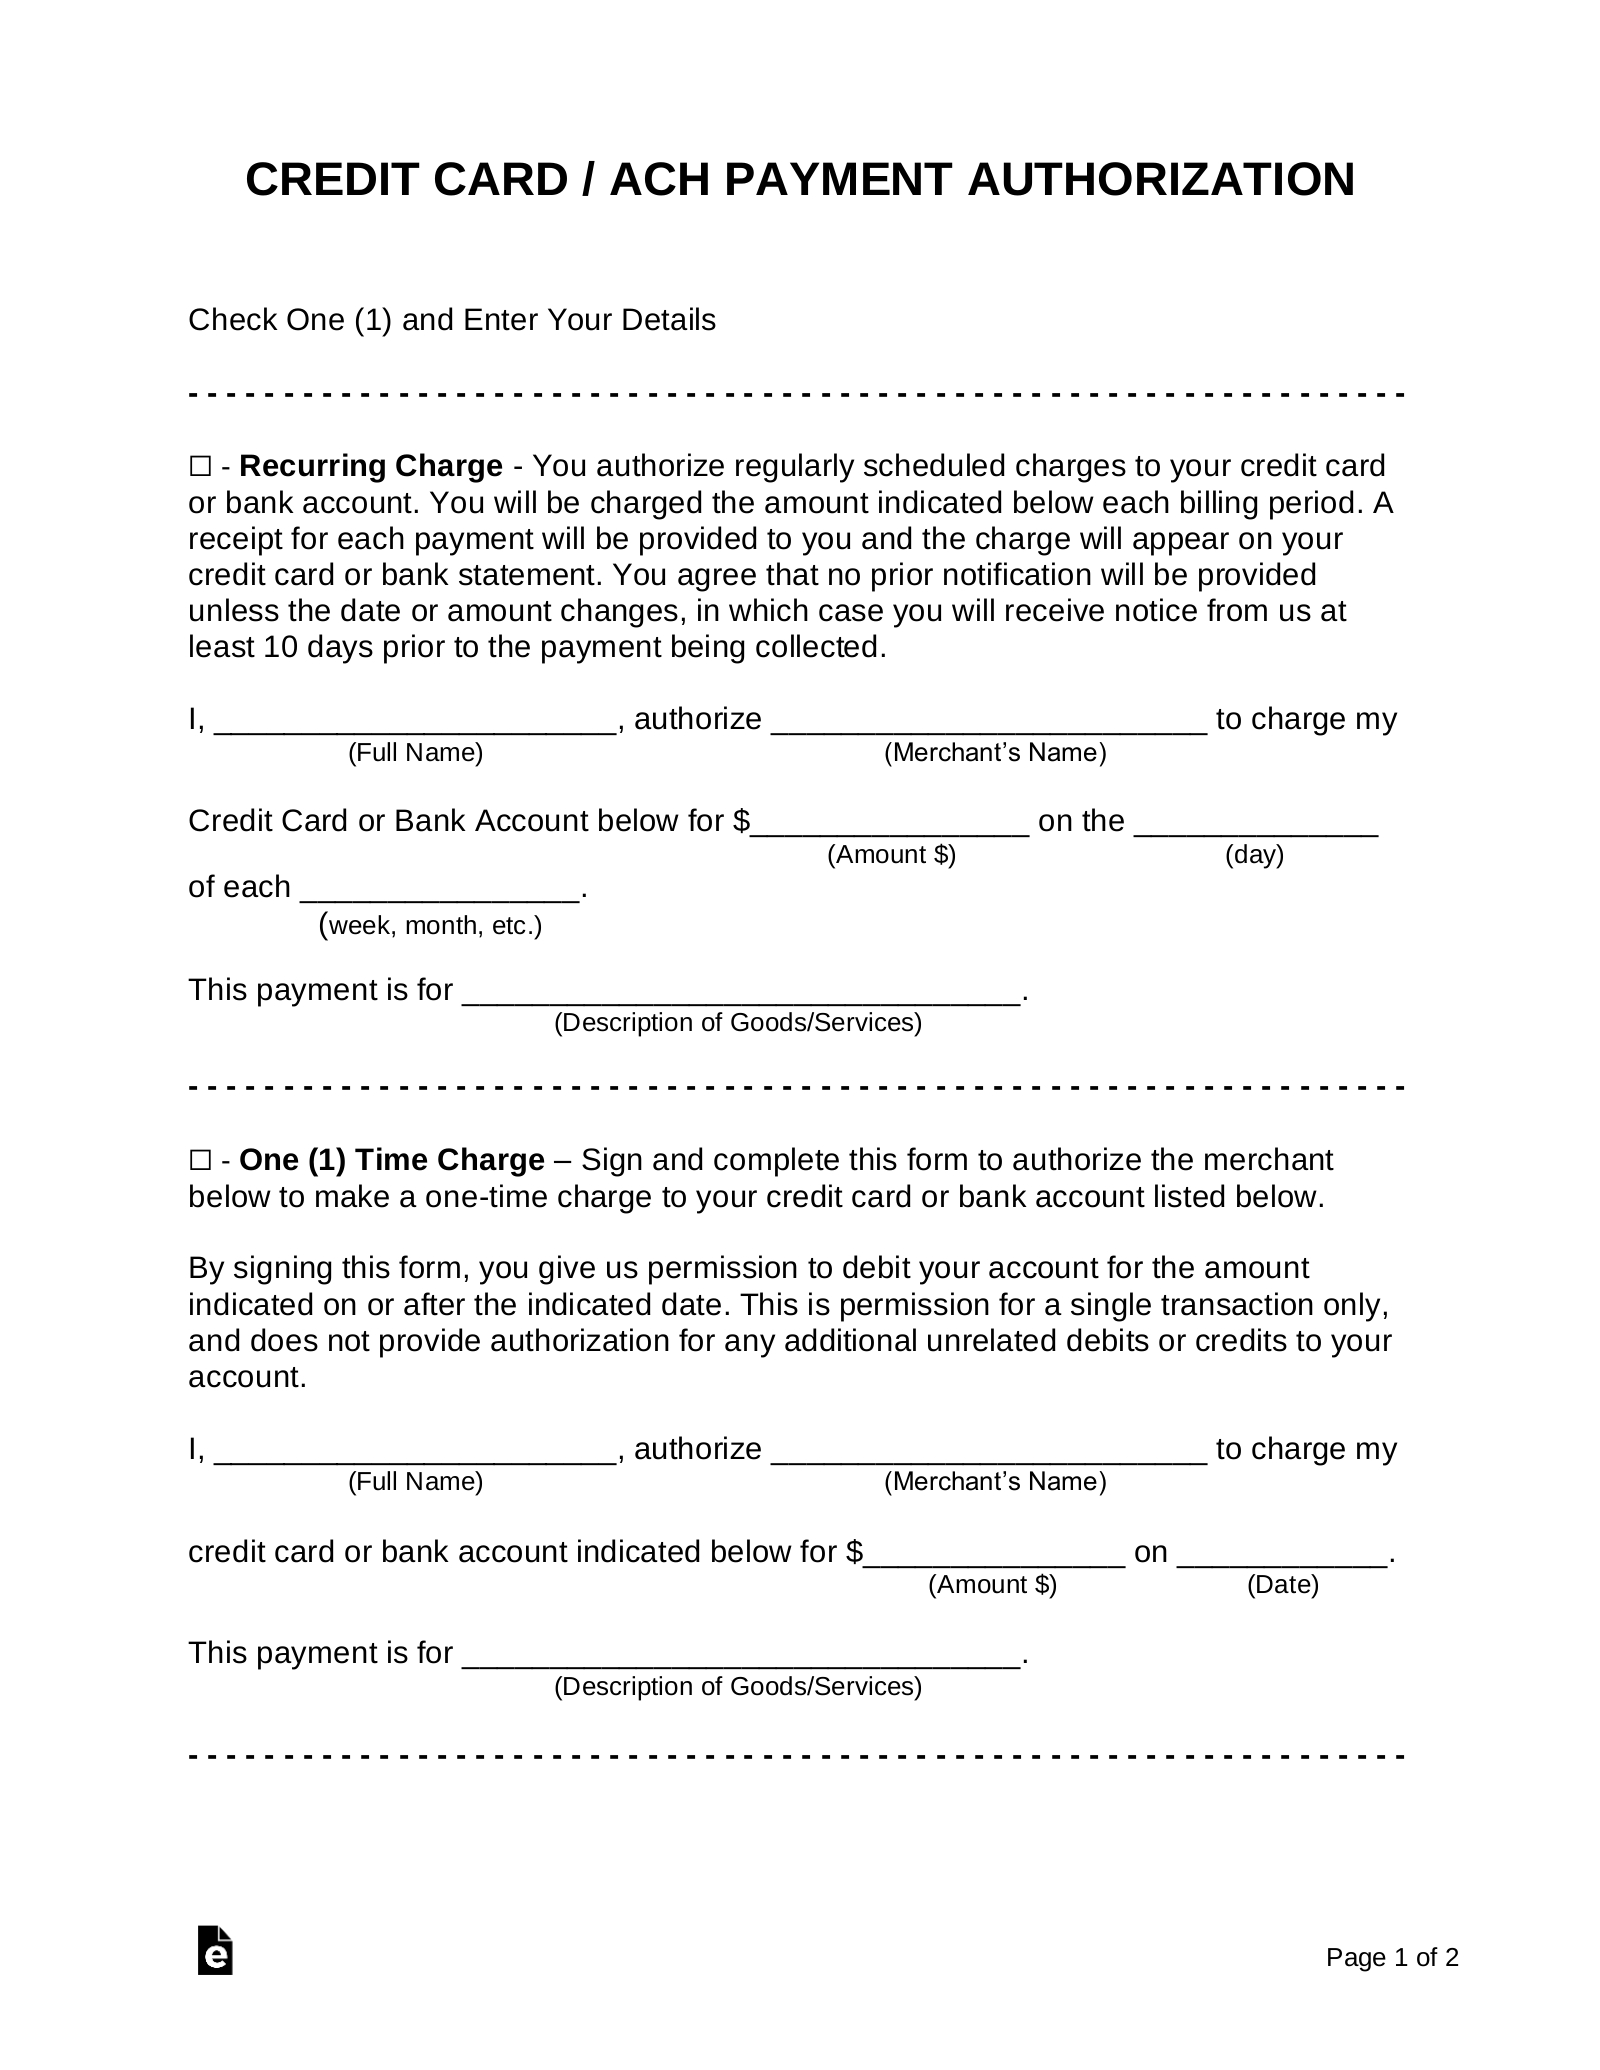 Free Credit Card (Ach) Authorization Forms – Pdf | Word For Credit Card Authorization Form Template Word